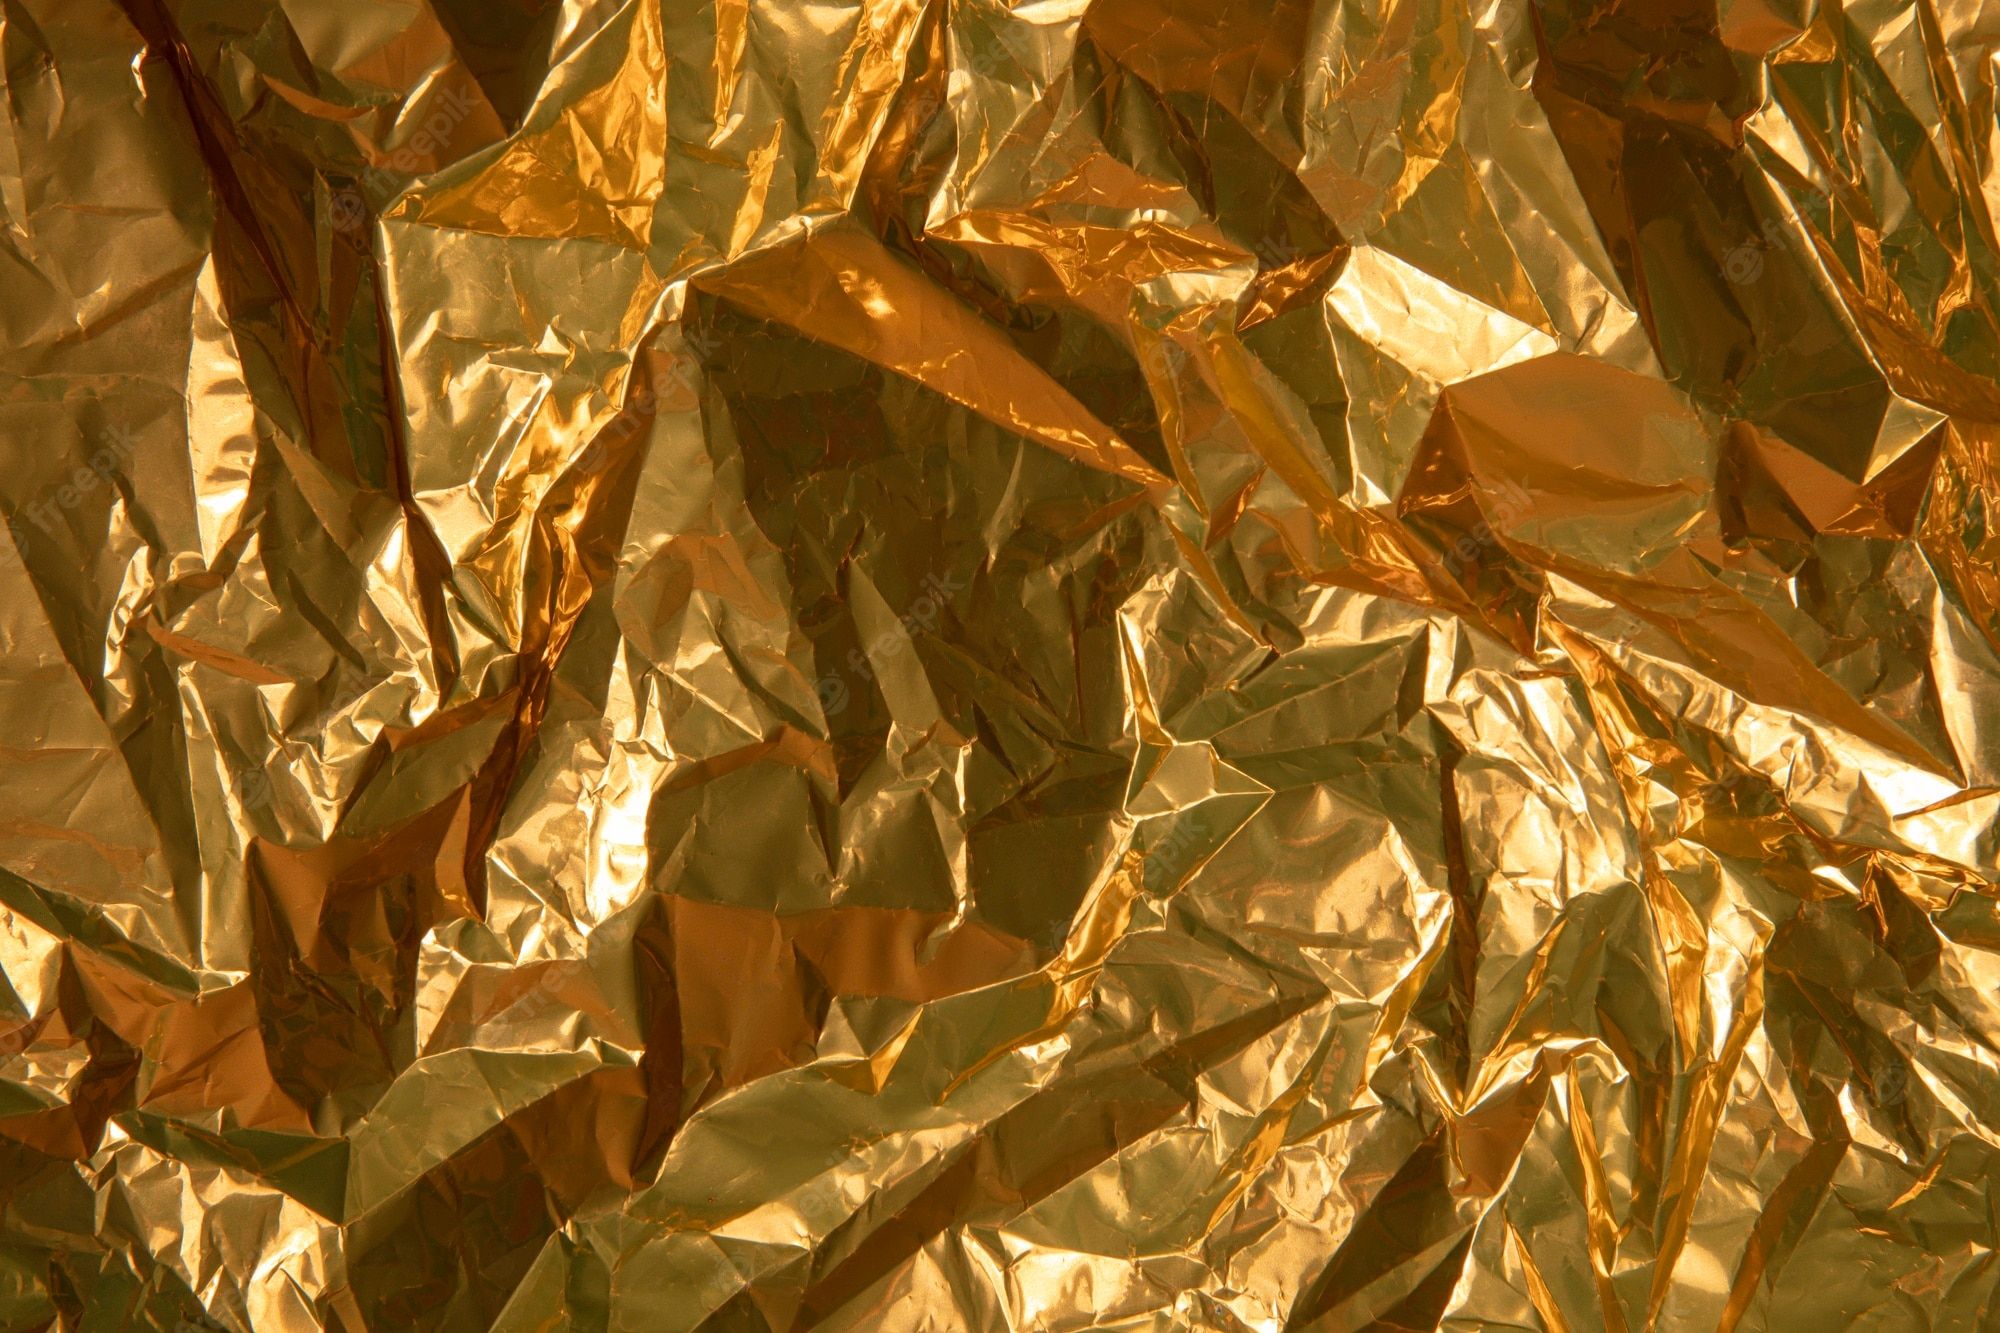 Gold foil background image with a crumpled texture - Gold